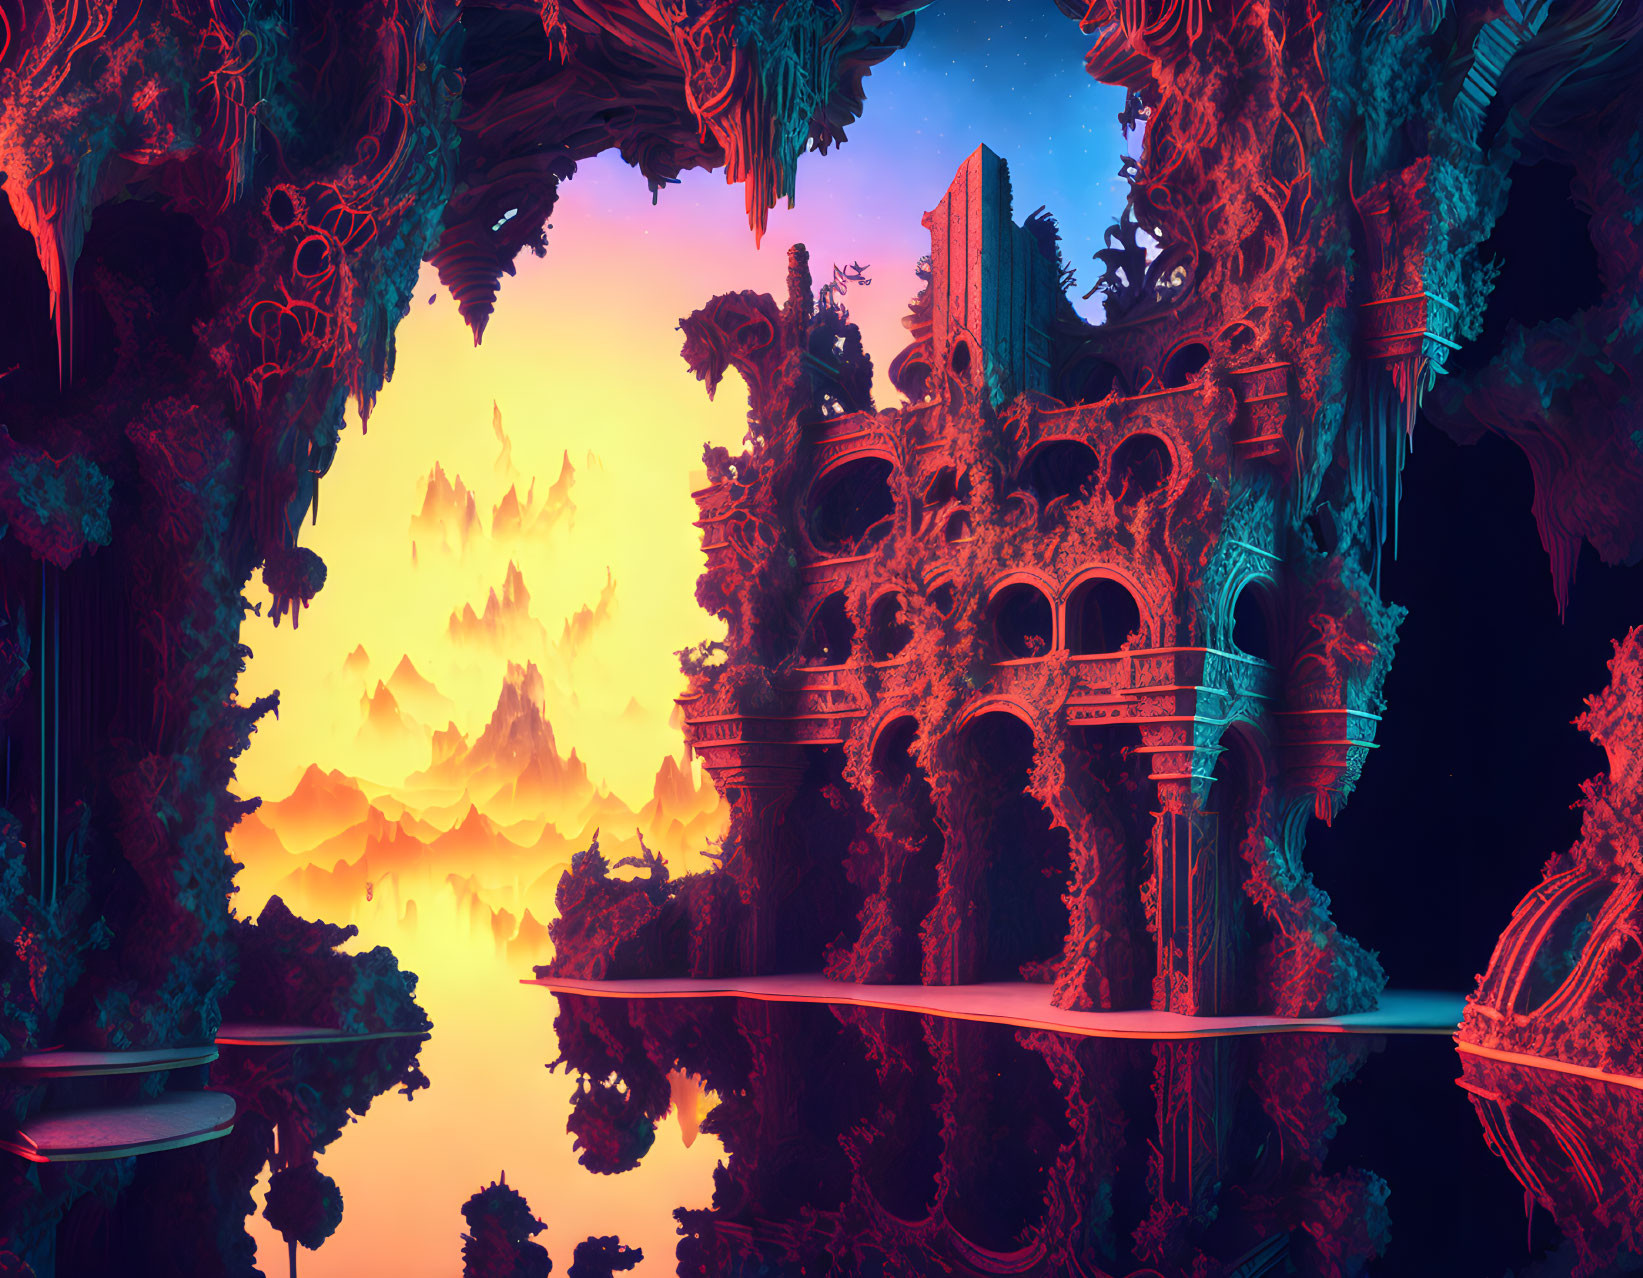 Fantasy landscape with ancient structure on floating islands at sunset